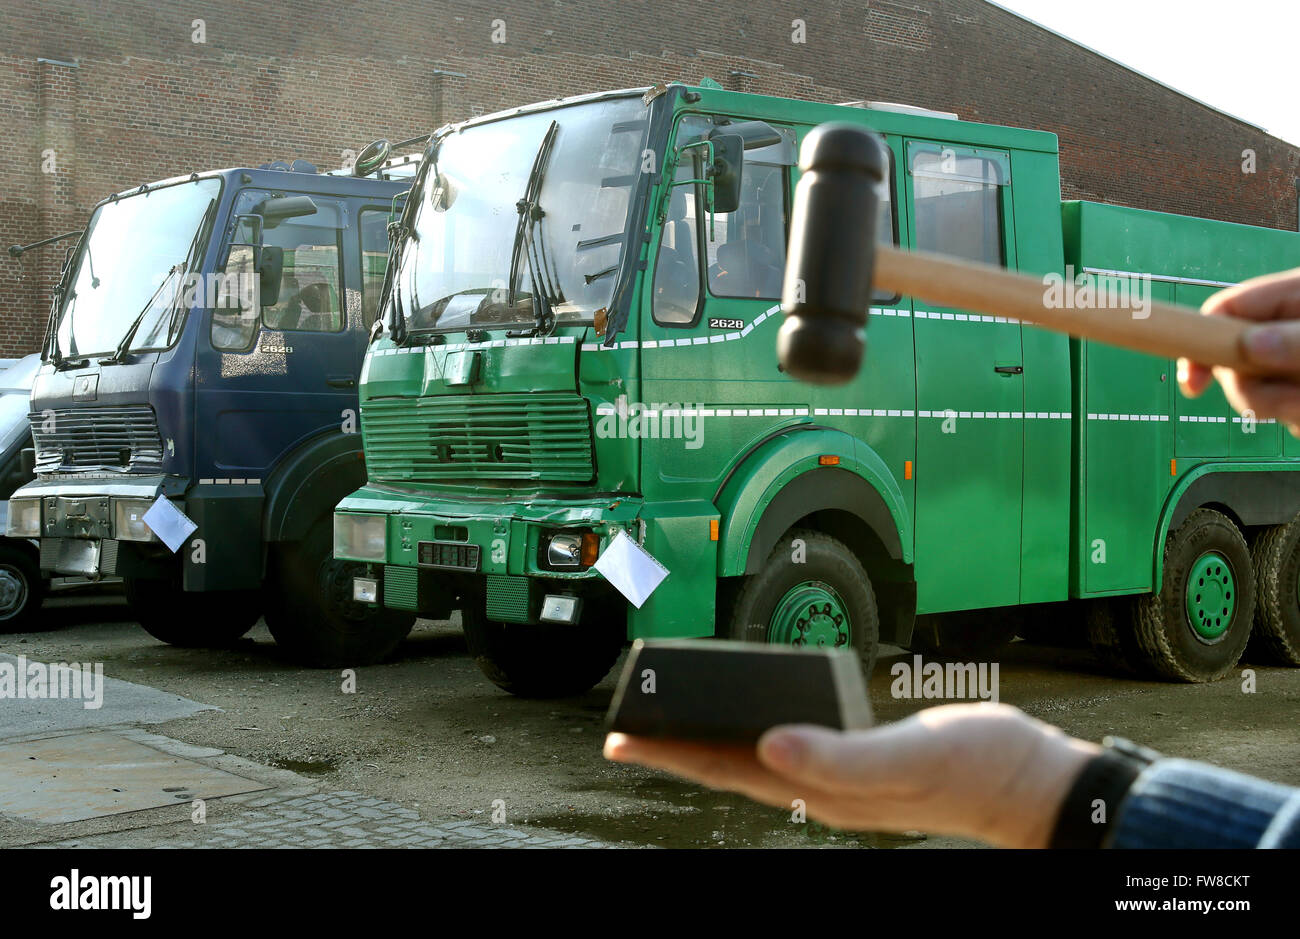 Duesseldorf, Germany. 1st Apr, 2016. ILLUSTRATION - Two disused police water cannons standing in a hall in Duesseldorf, Germany, 1 April 2016. In the front, a hand is holding a hammer used during auctions. The disused police vehicles and the vehicles of other public authorities are sold by auction at the Duesseldorf hall once per month. Photo: Roland Weihrauch/dpa/Alamy Live News Stock Photo